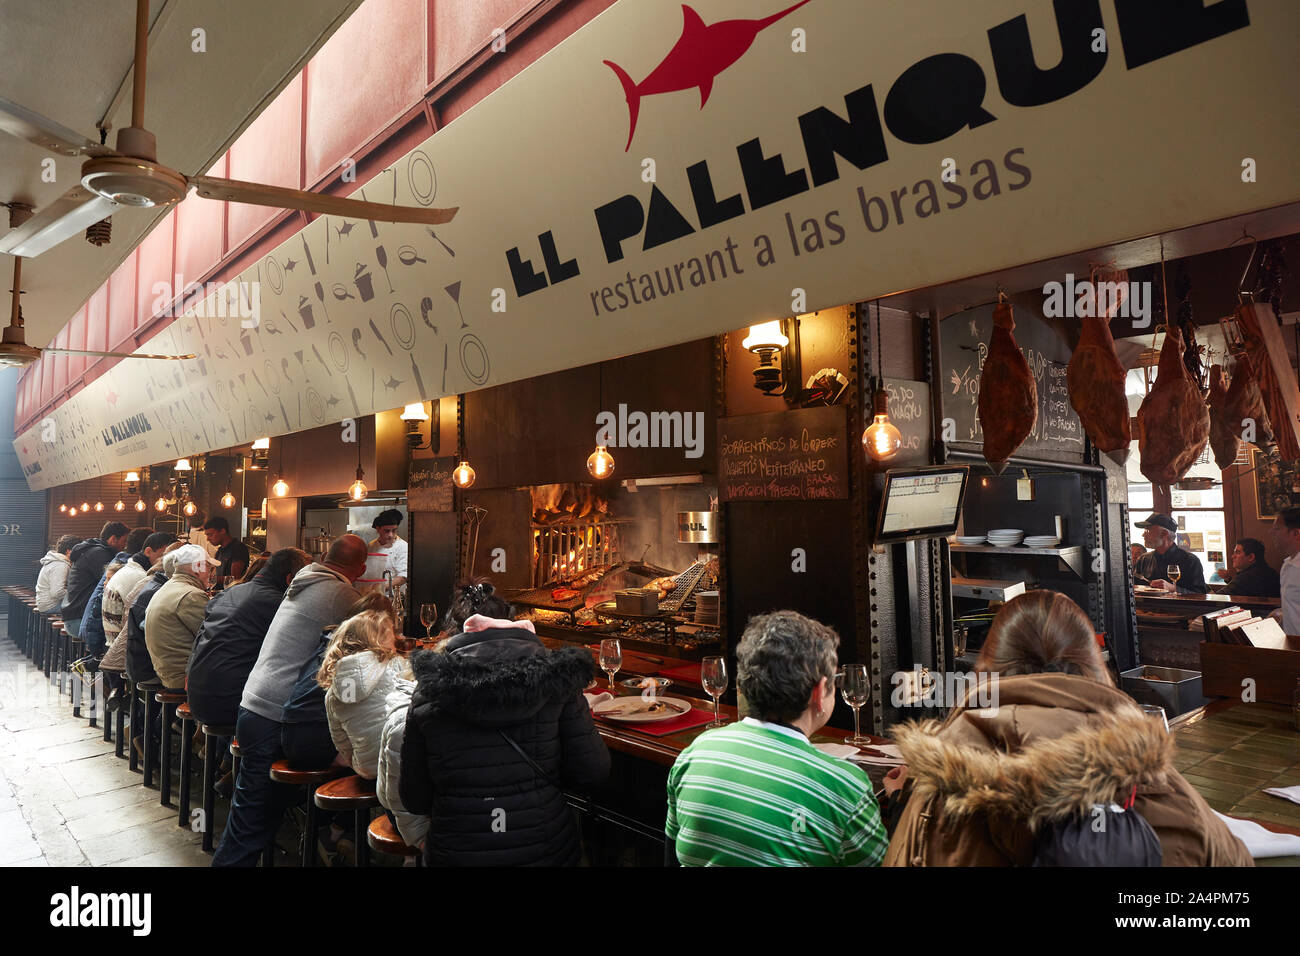 People eating inside the "Mercado del Puerto", Montevideo Old Town, Uruguay. Stock Photo